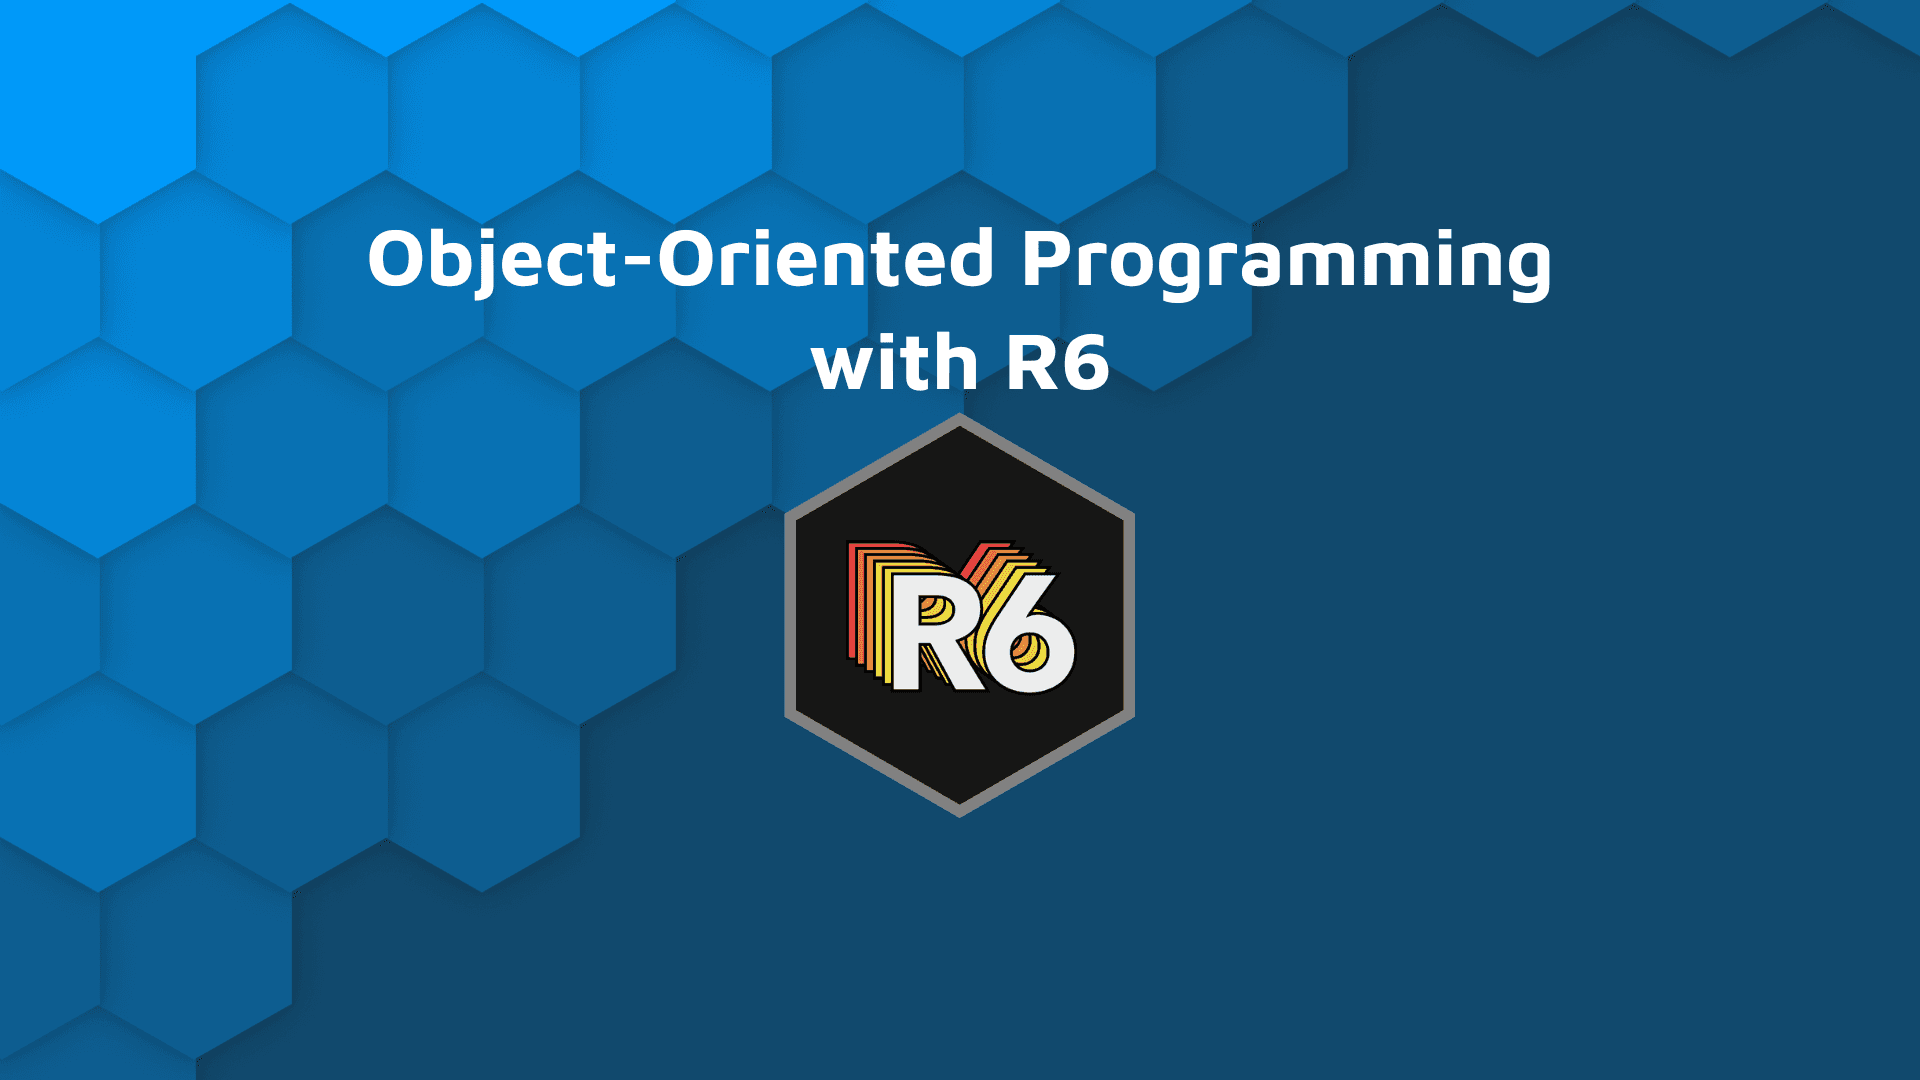 Blog banner with white text, "Object-Oriented Programming with R6" and the R6 hex logo